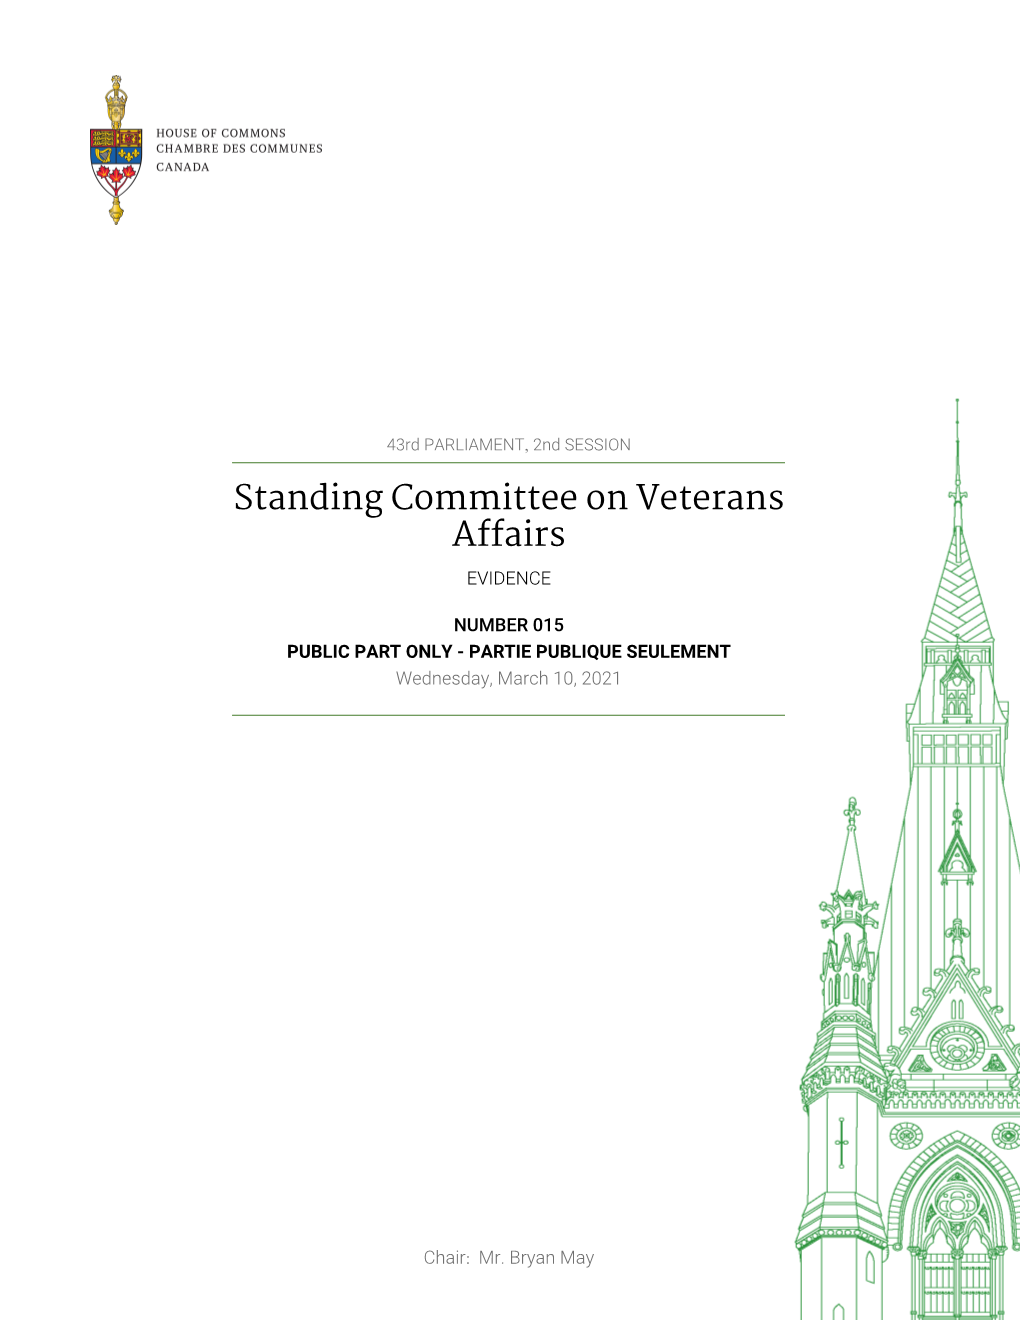 Evidence of the Standing Committee on Veterans